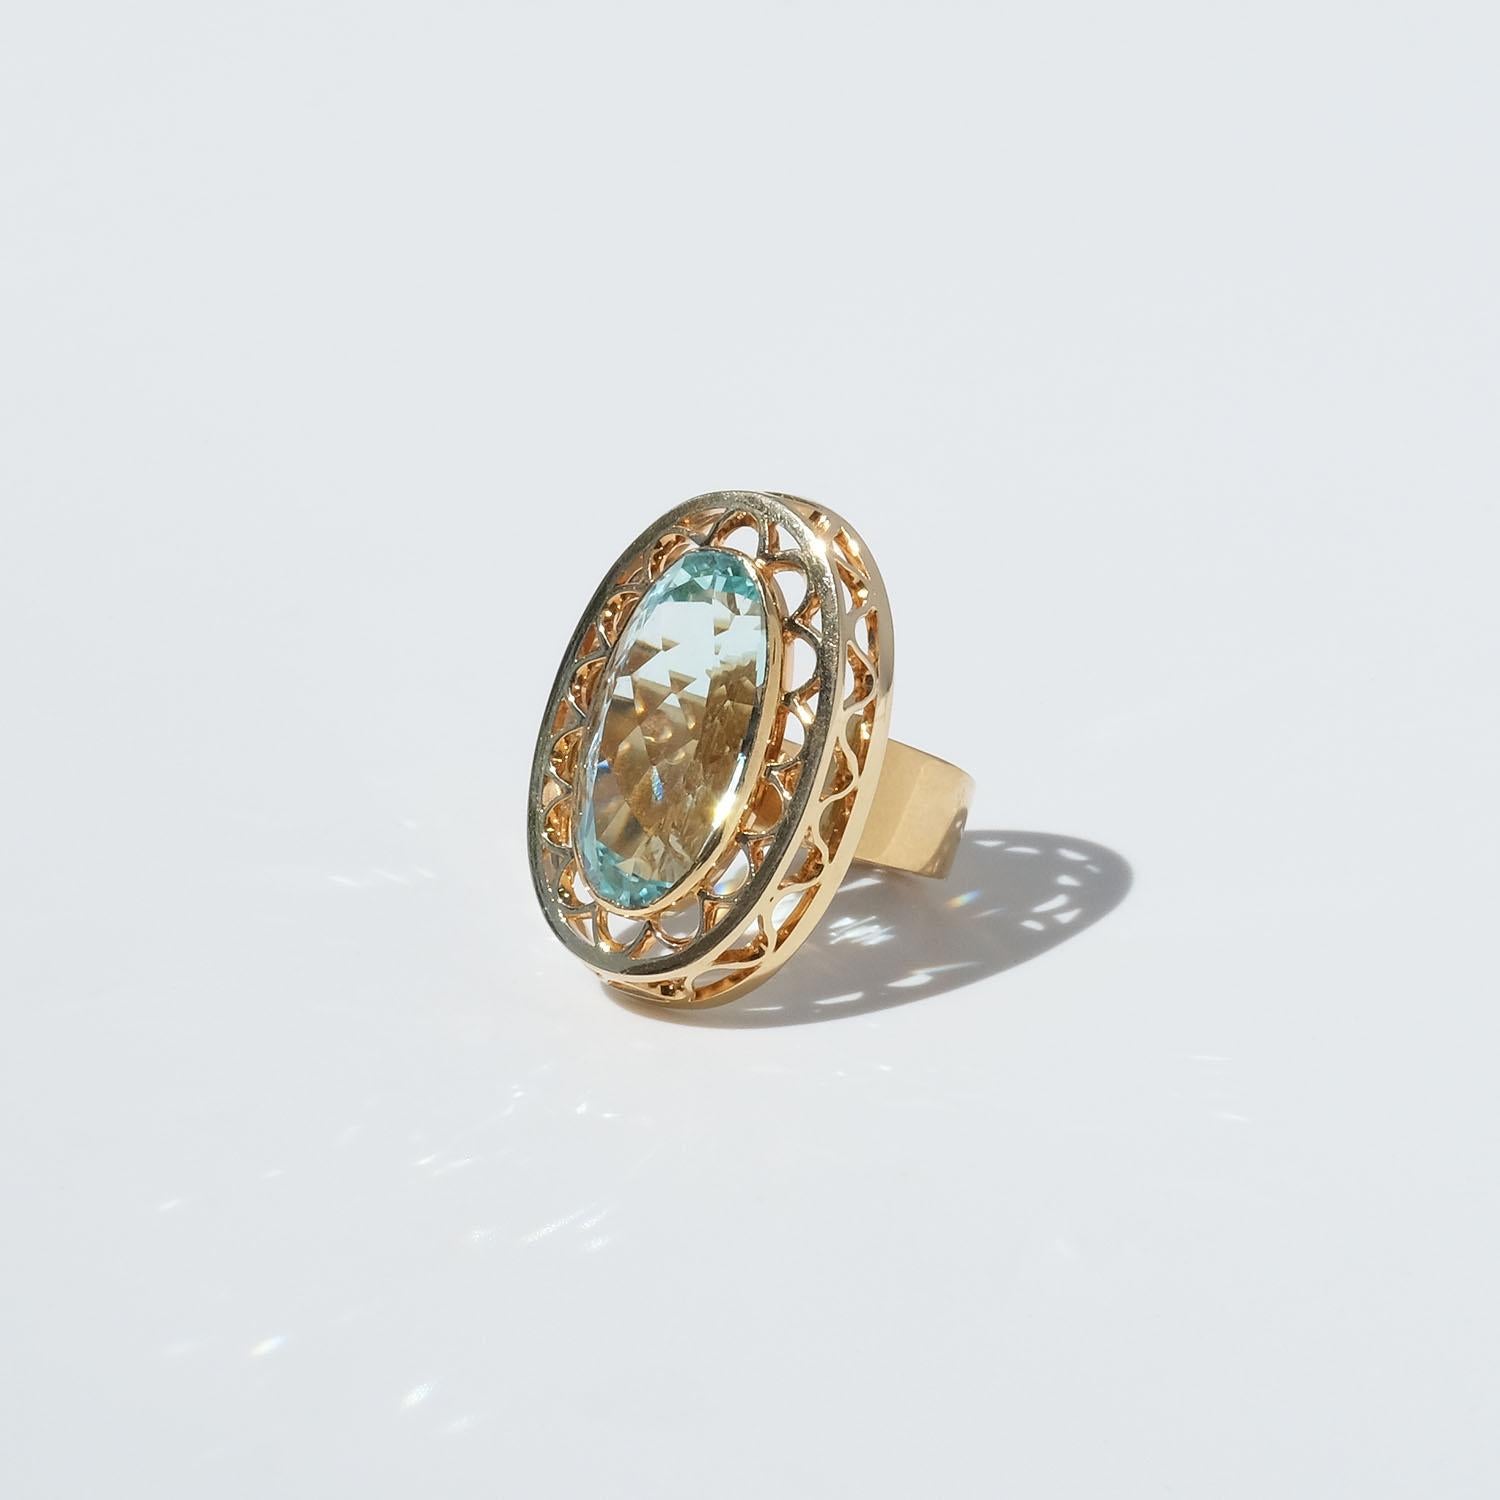 Oval Cut Vintage 18k Gold and Aquamarine Ring by Master Anders Högberg Year, 1977 For Sale